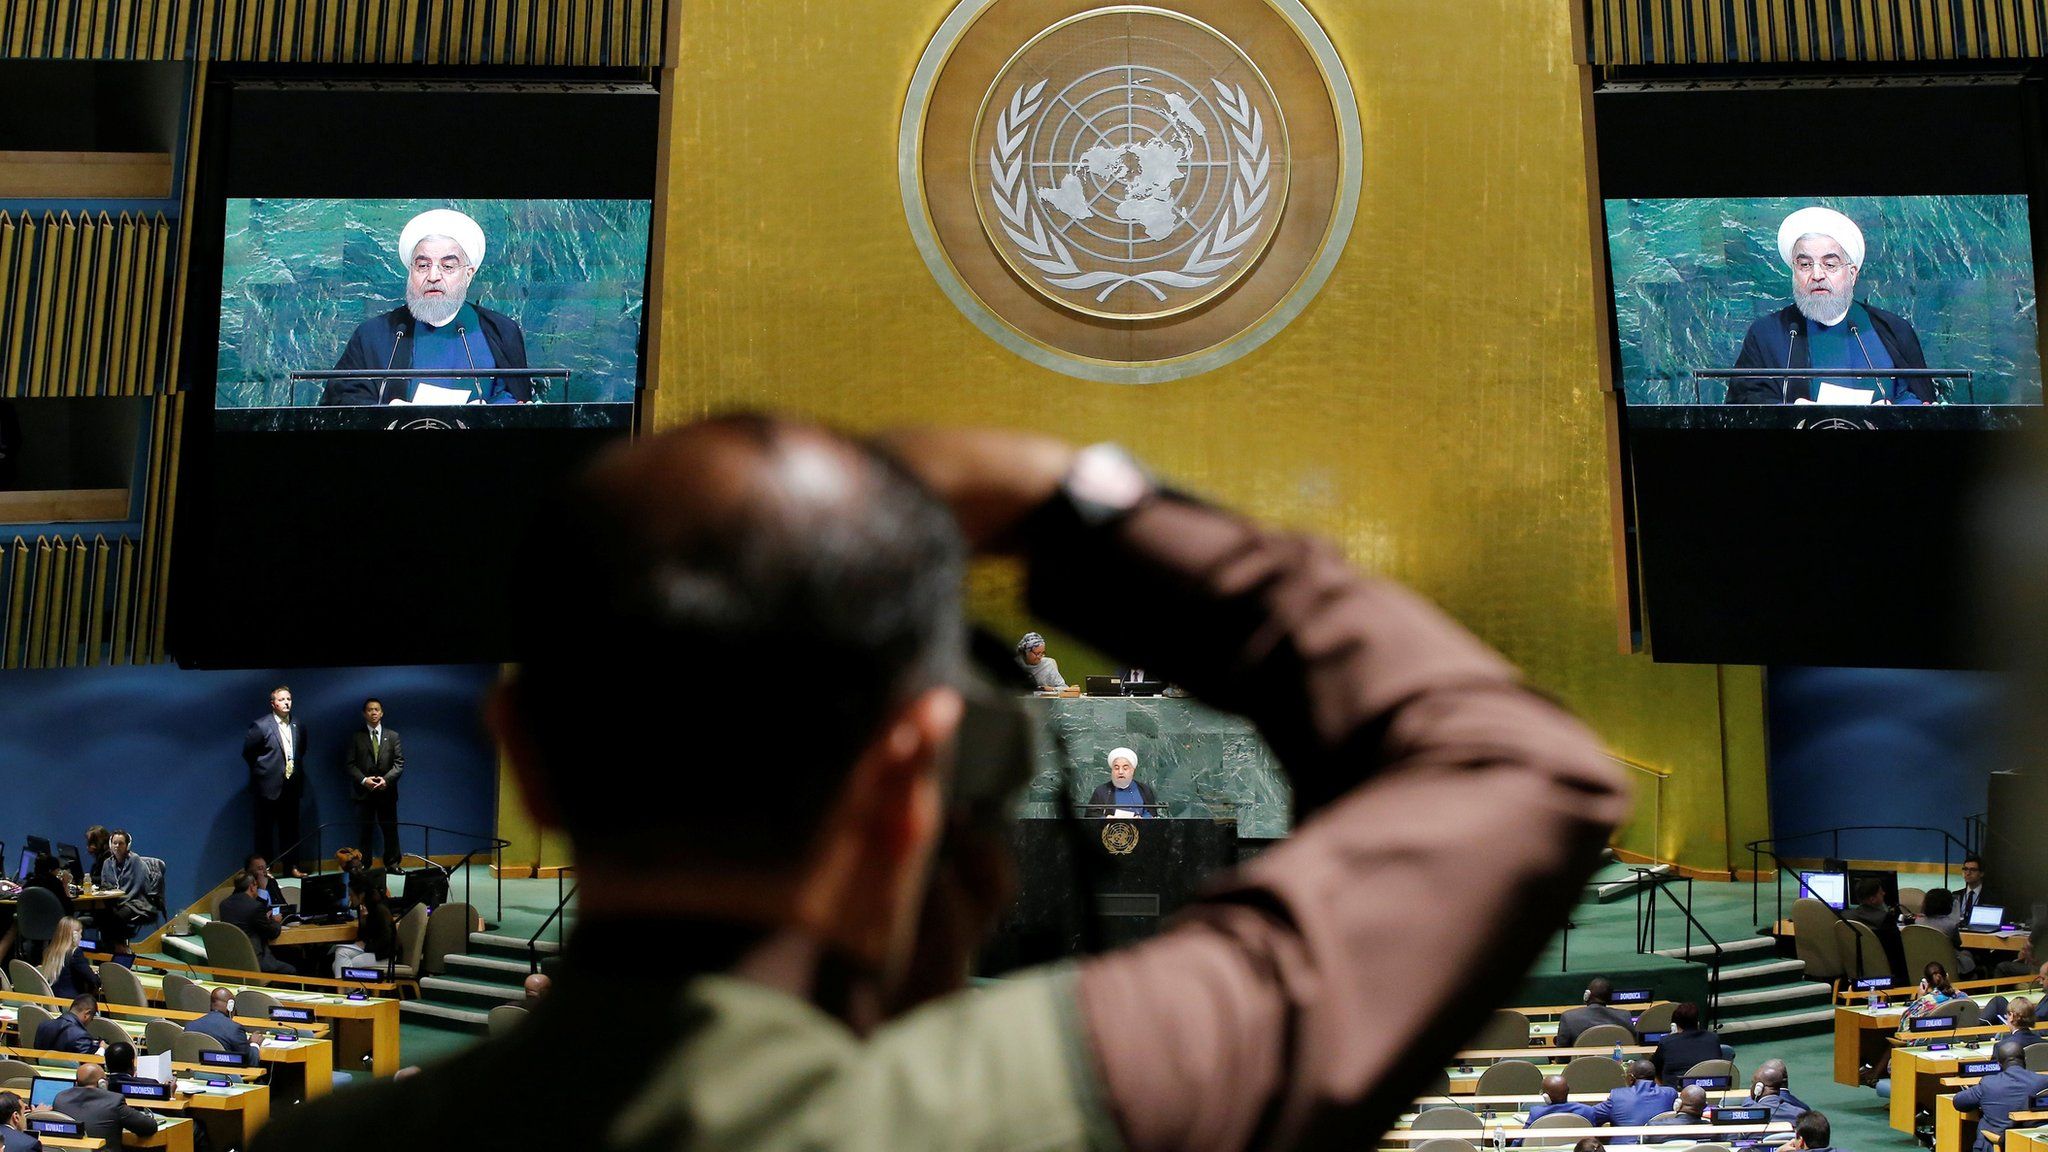 President Hassan Rouhani of Iran on screens at the UN General Assembly in New York, 20 September